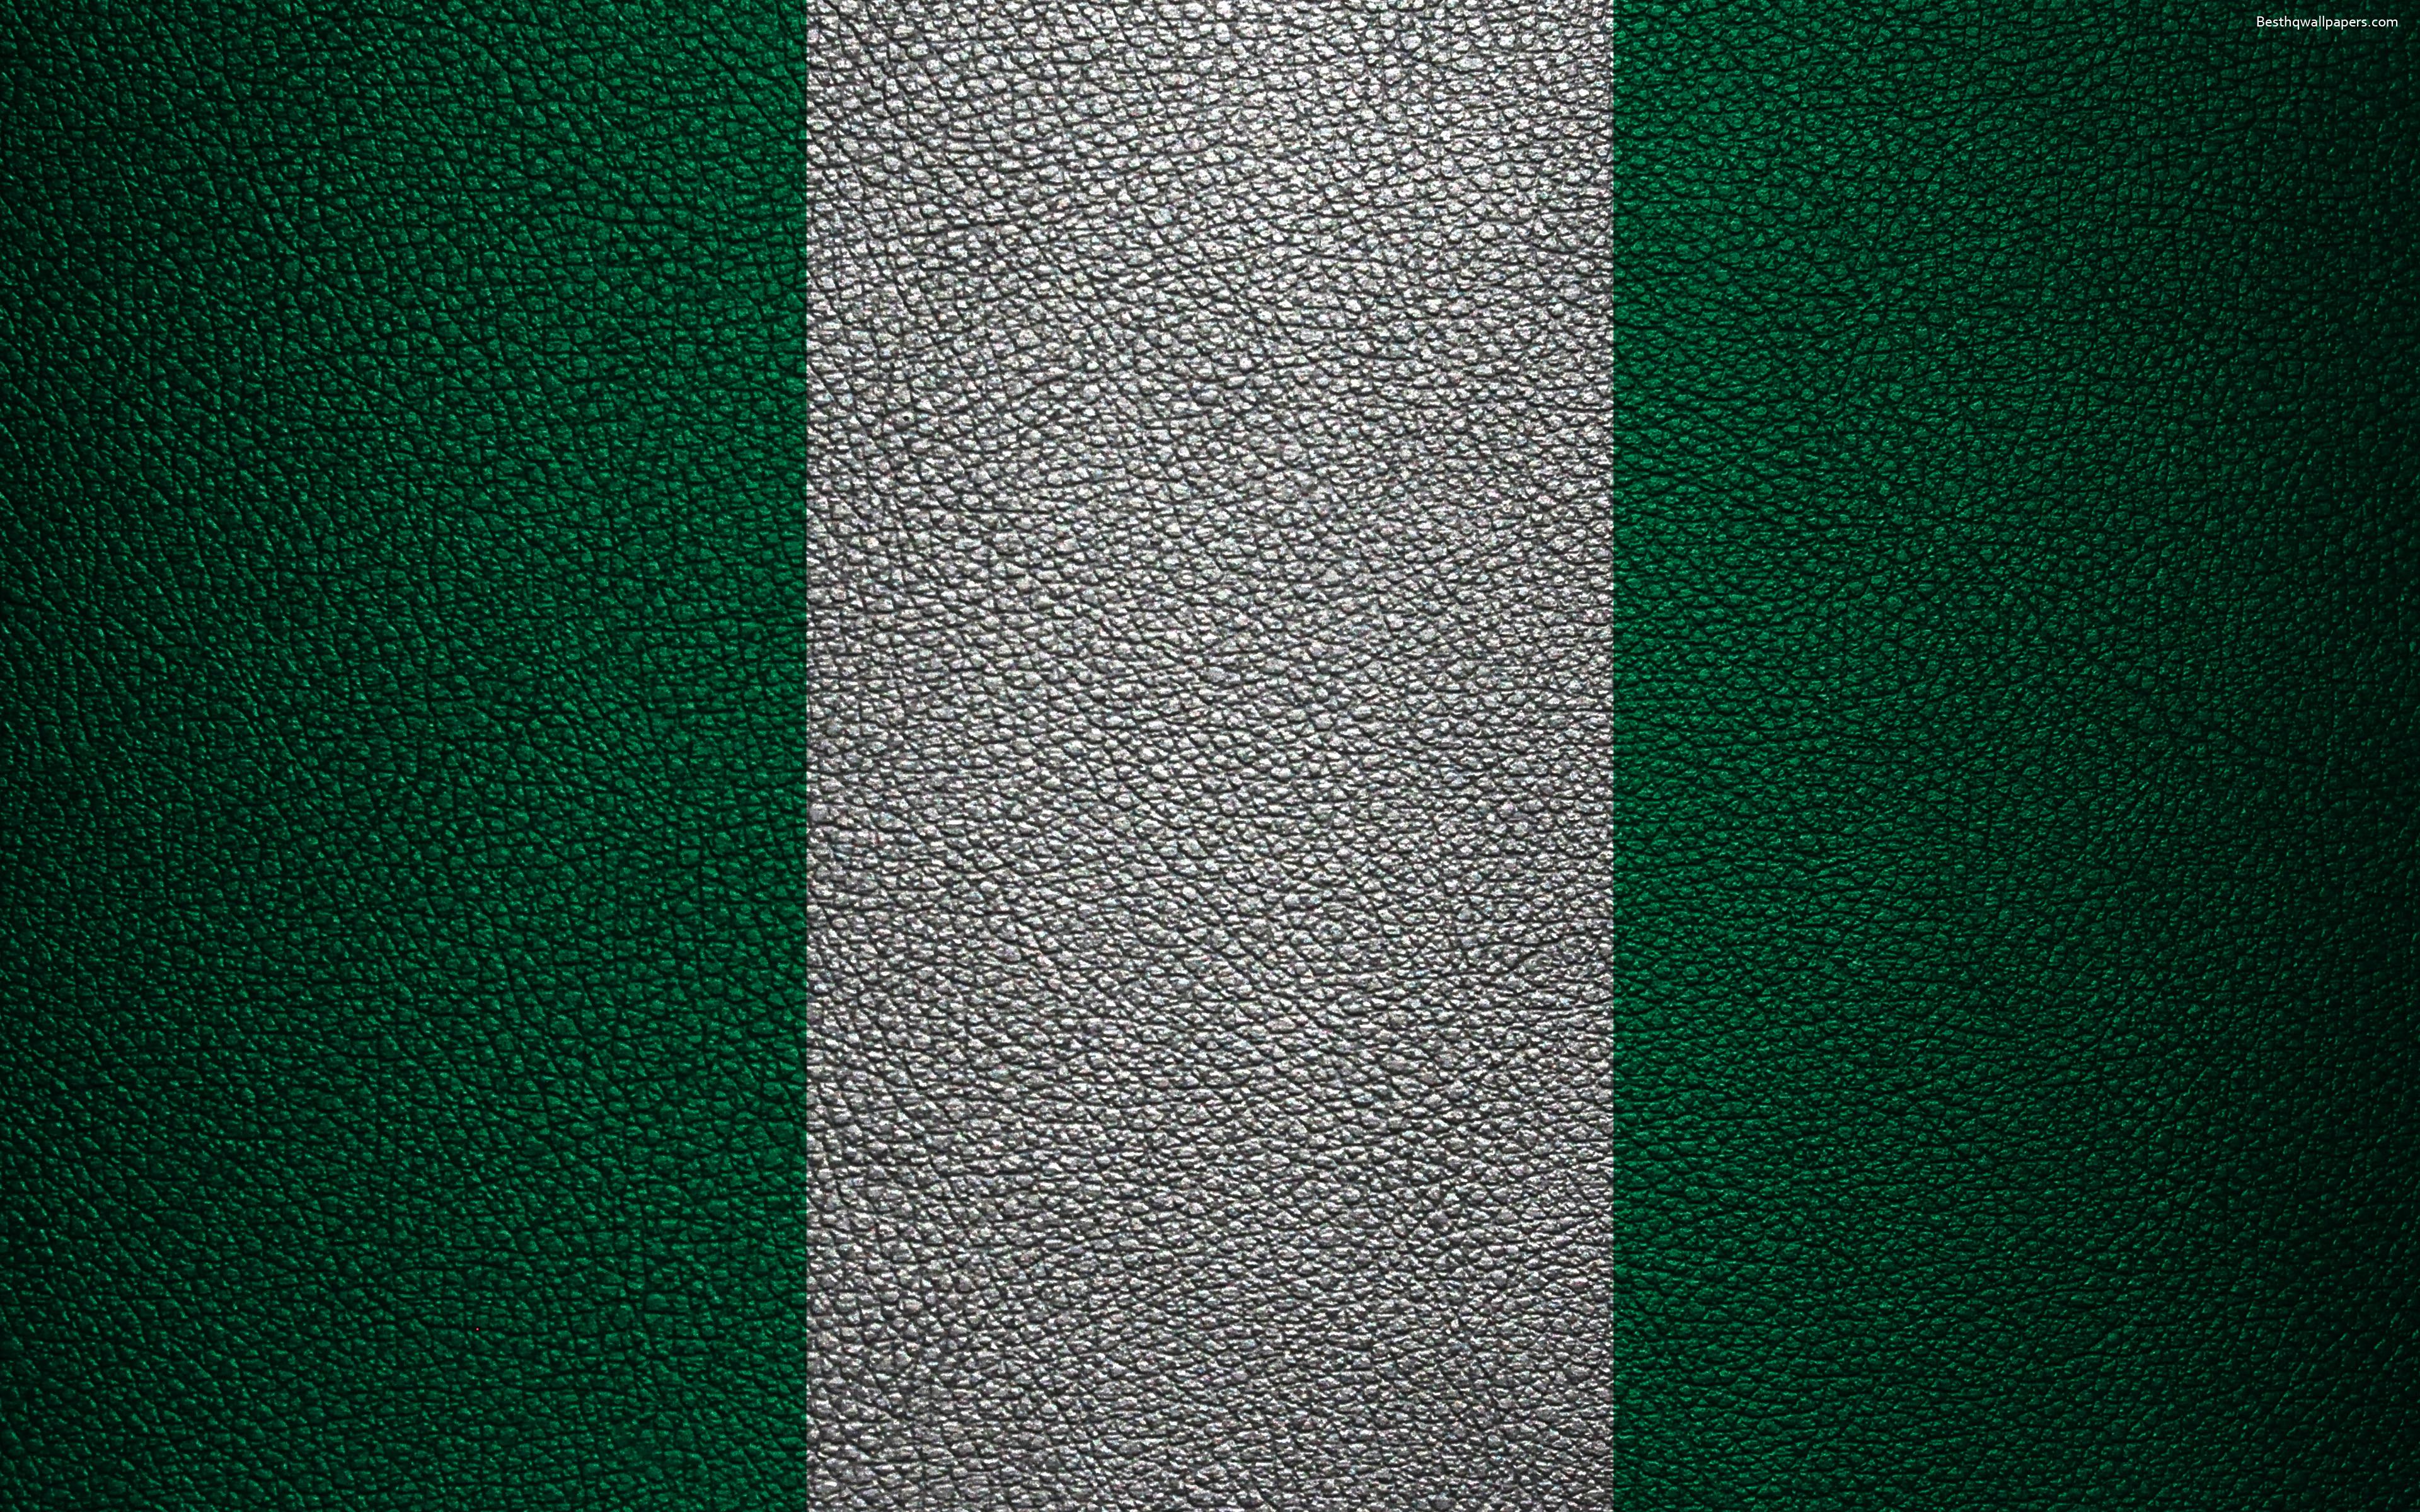 Download wallpaper Flag of Nigeria, Africa, 4K, leather texture